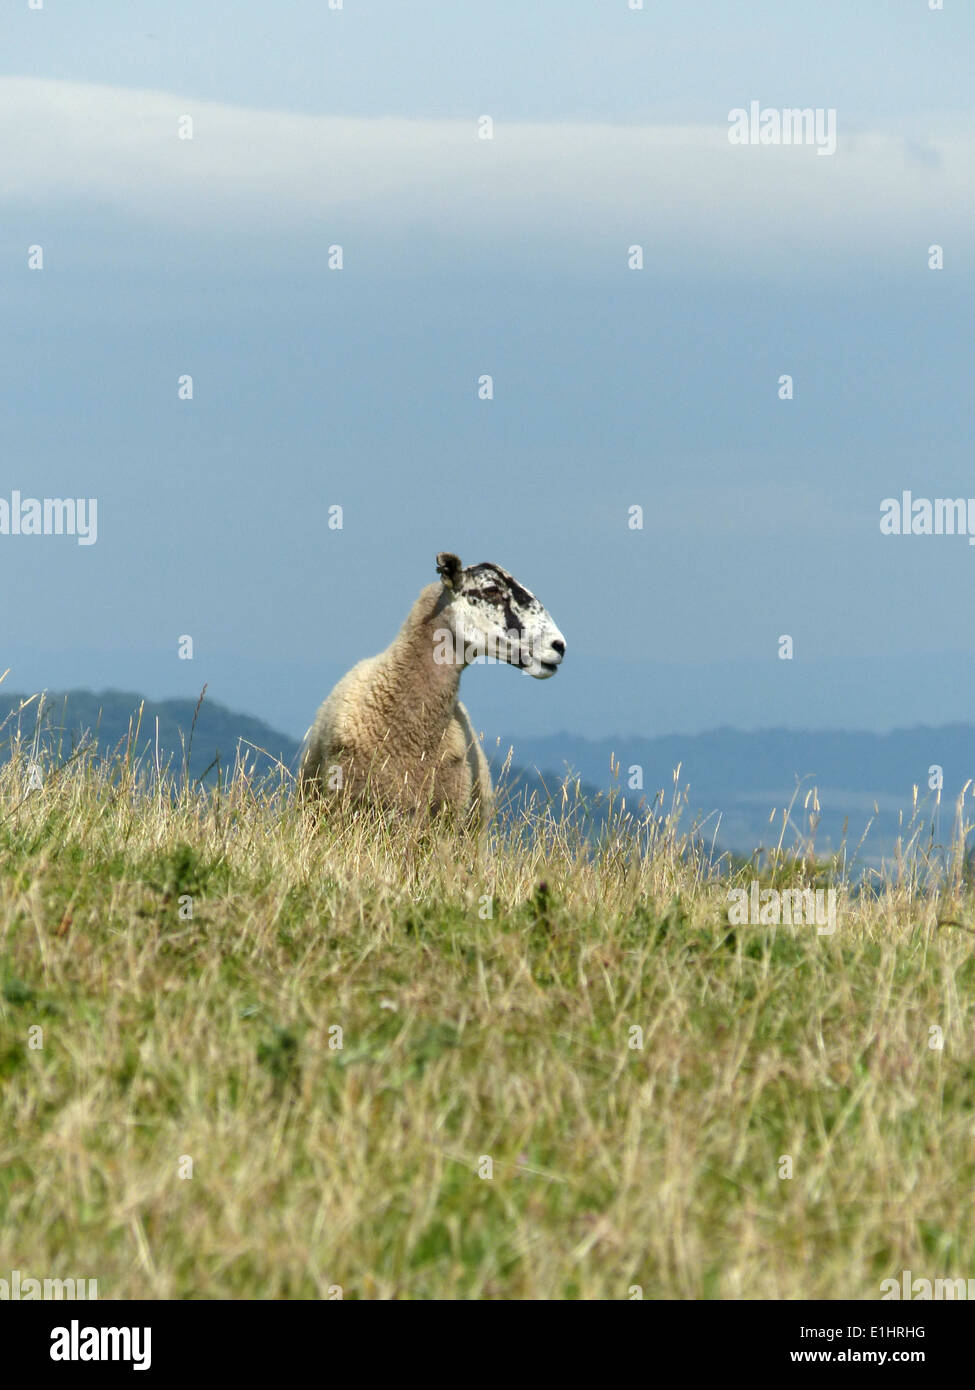 Black faced sheep in rolling countryside on a sunny day with blue sky Stock Photo